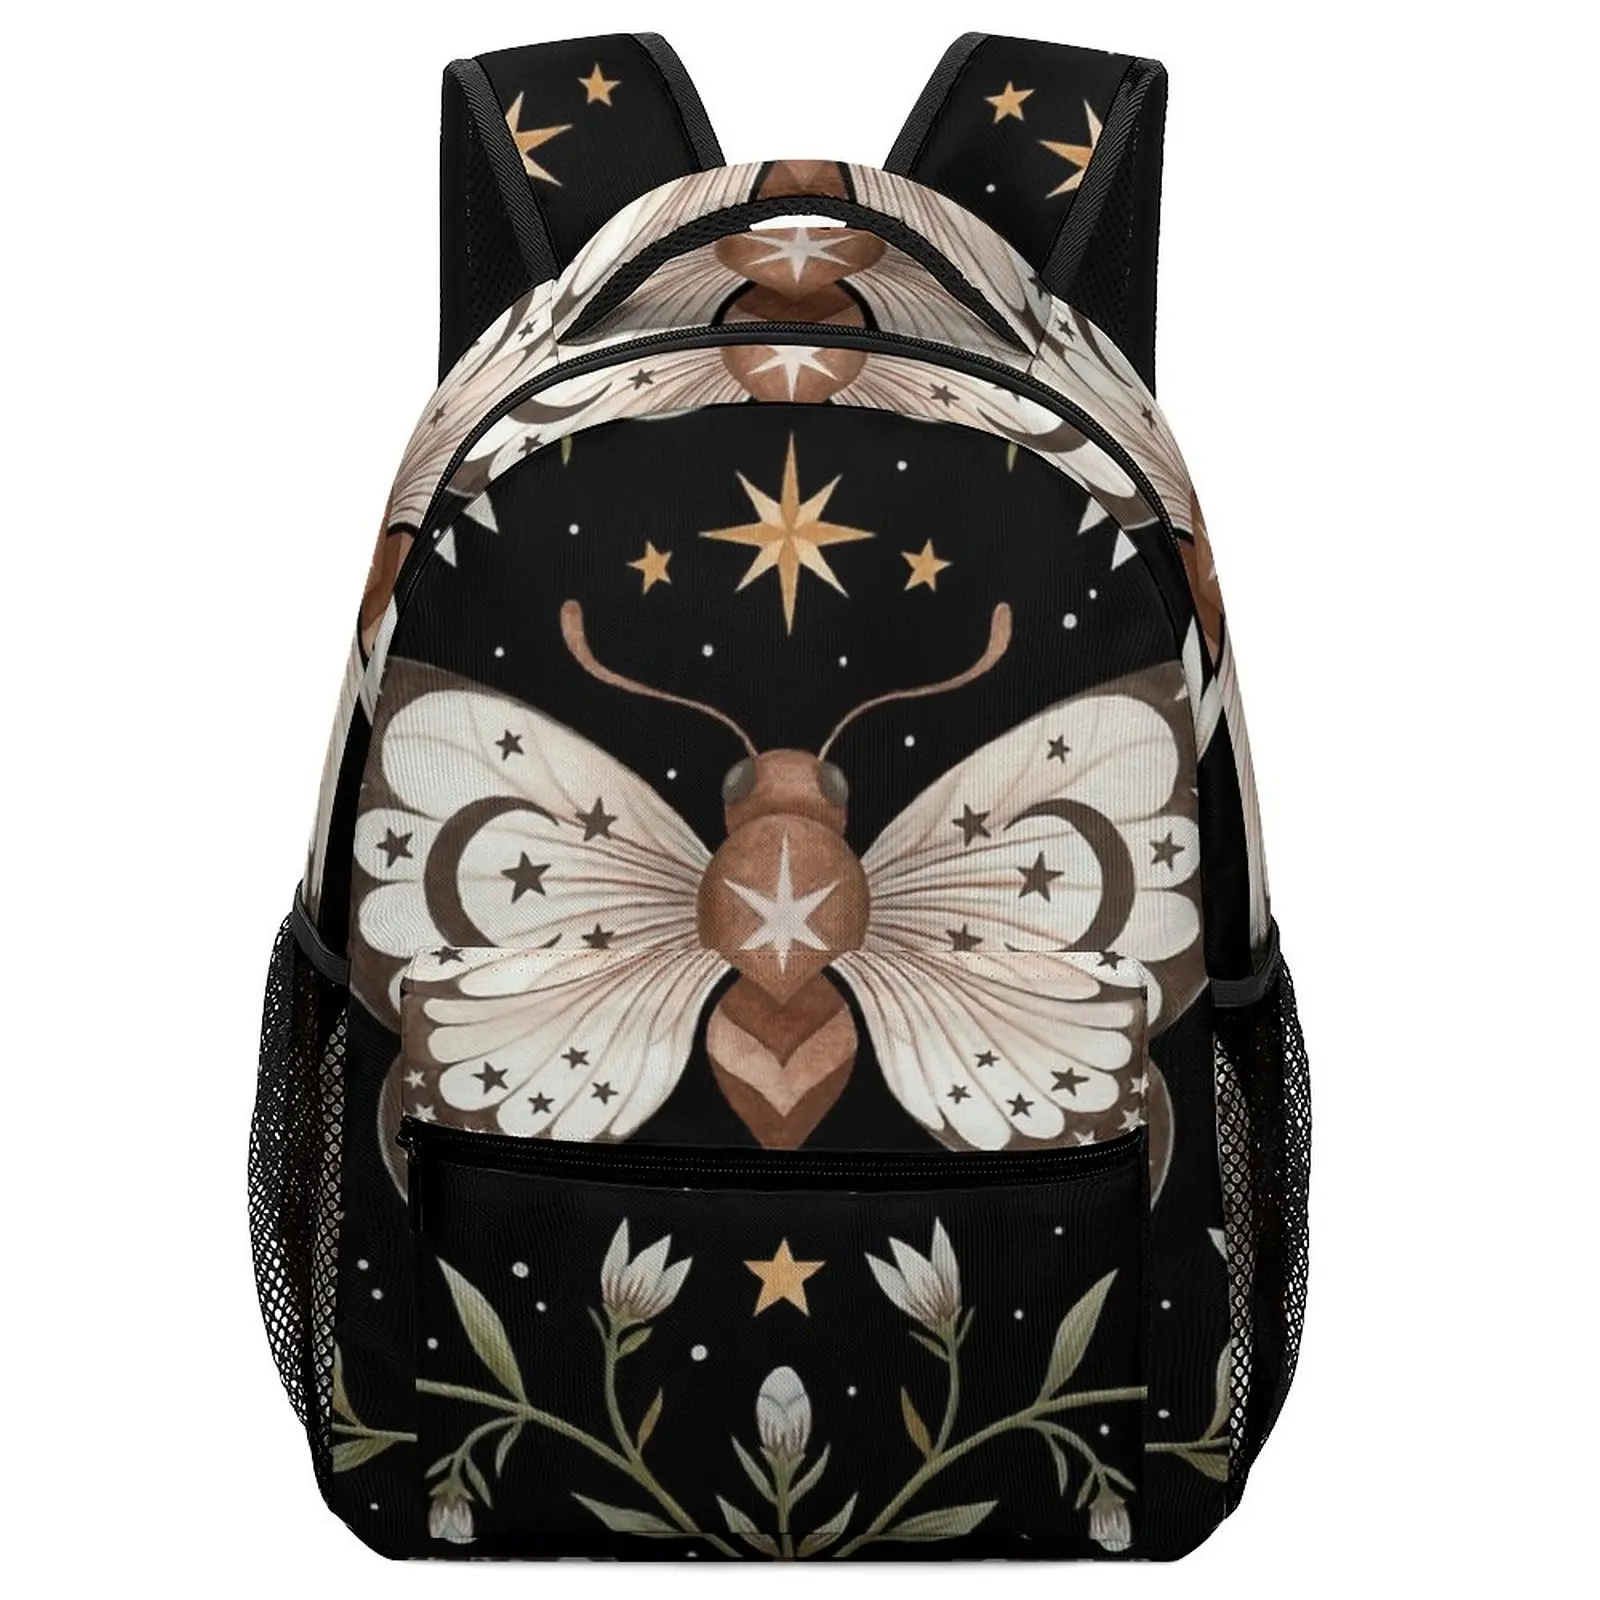 New Fashion Art Magical Wings Student Kids Women's Bag Teen Bag Middle School Backpack Boys